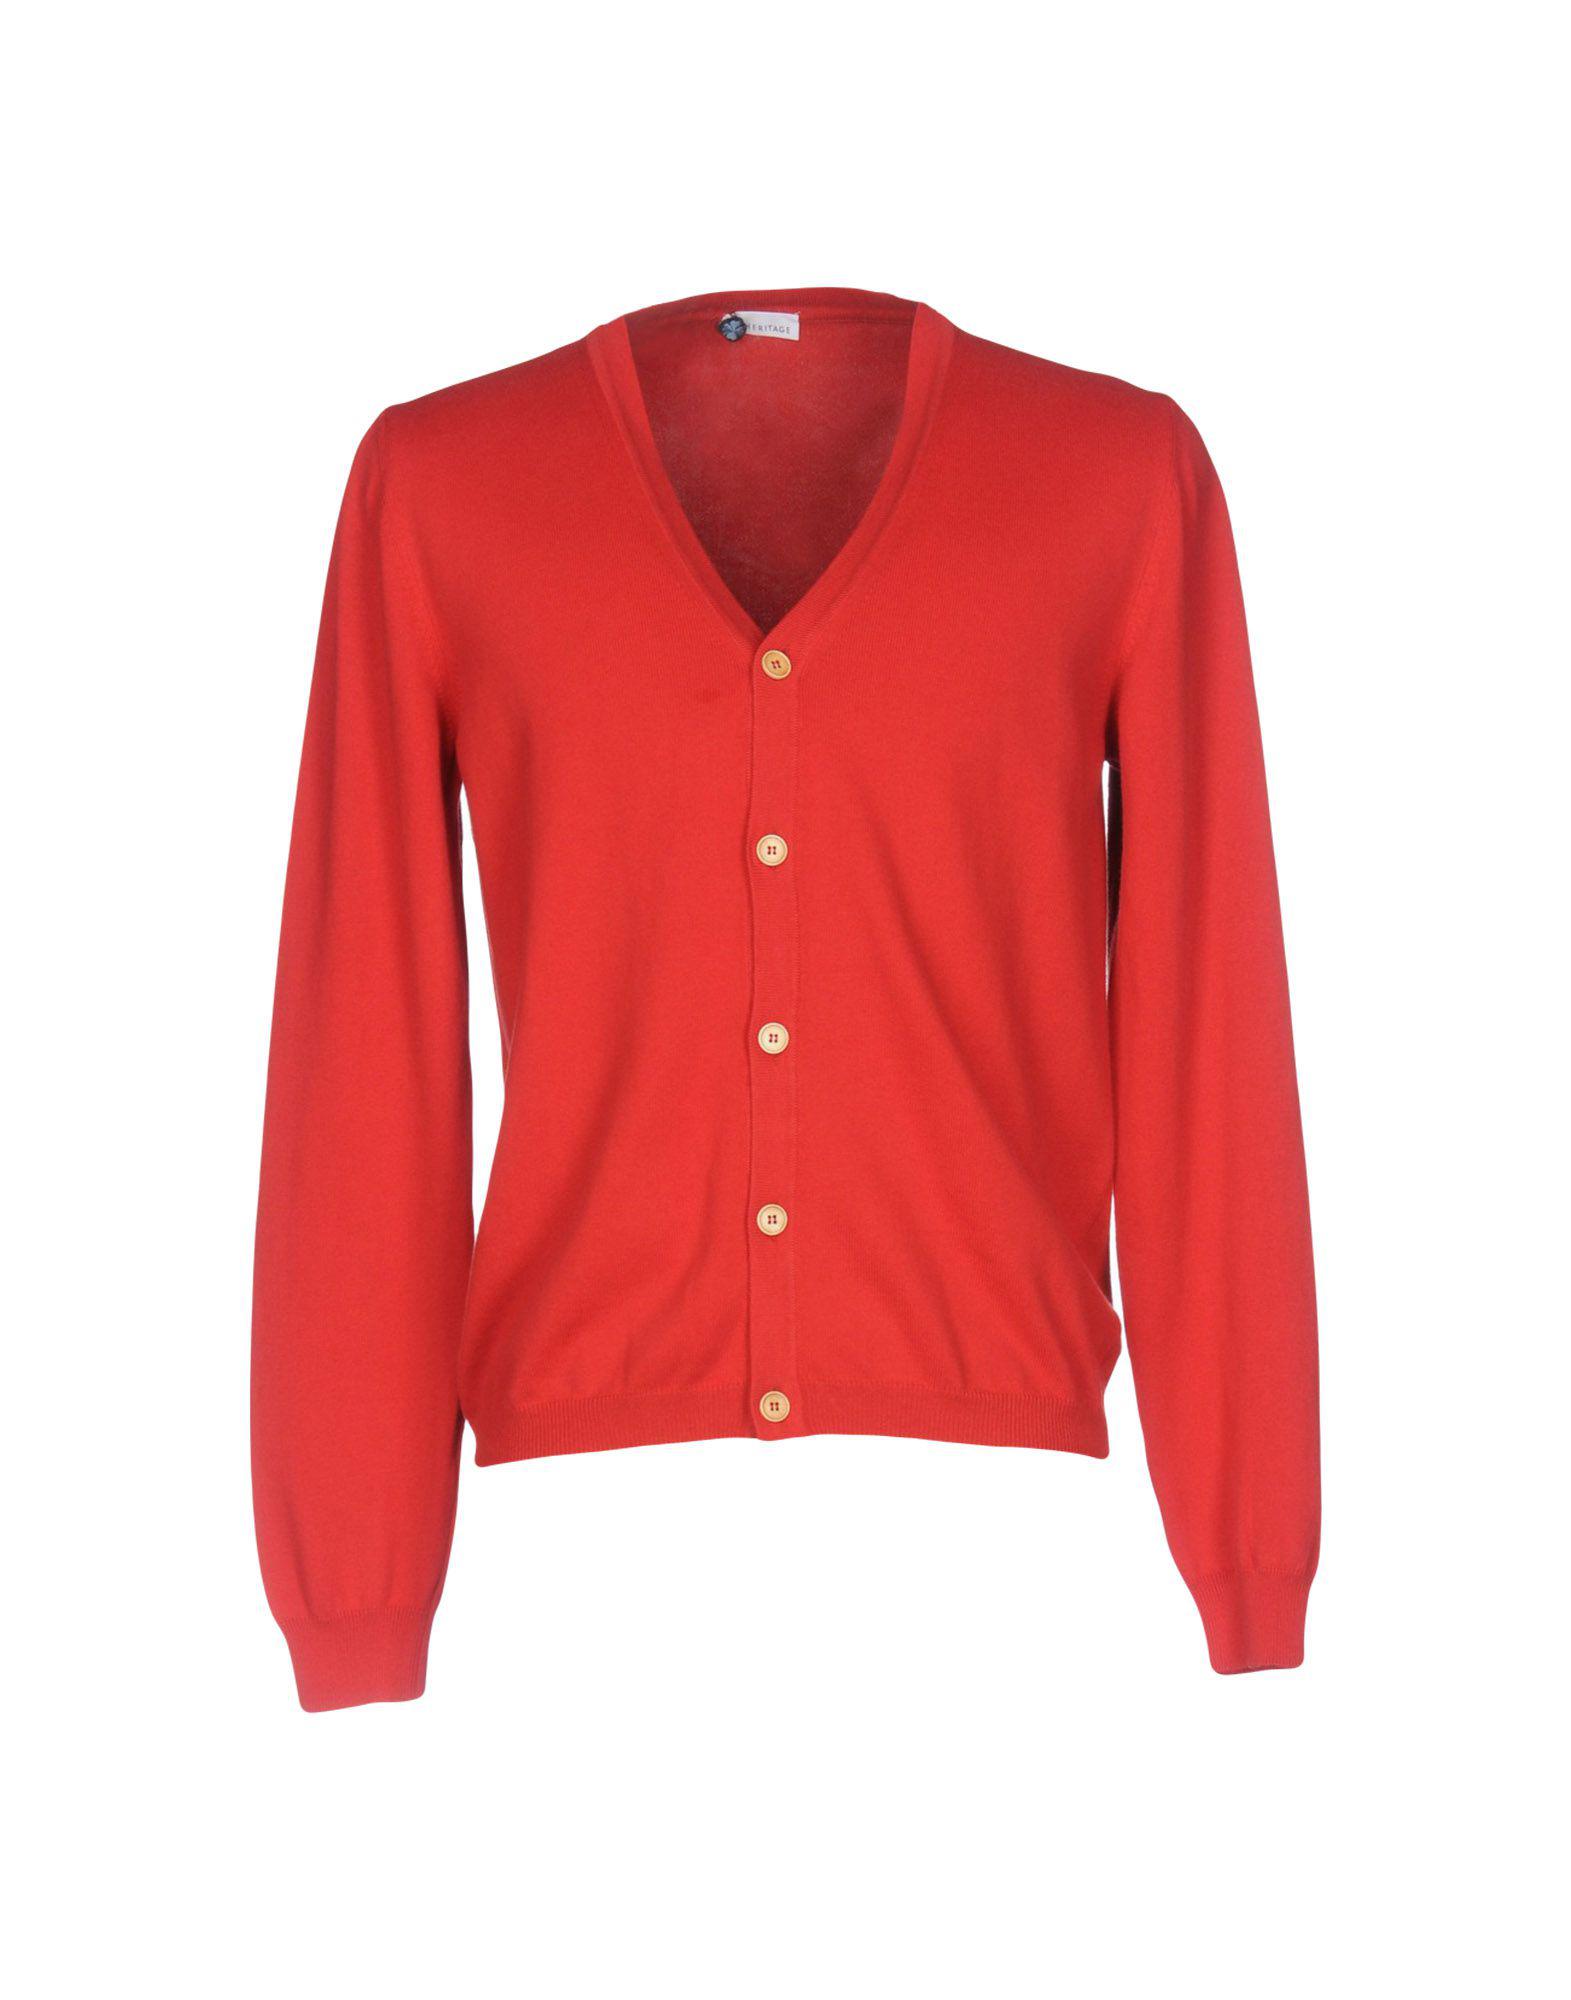 Lyst Heritage Cardigan  in Red  for Men 